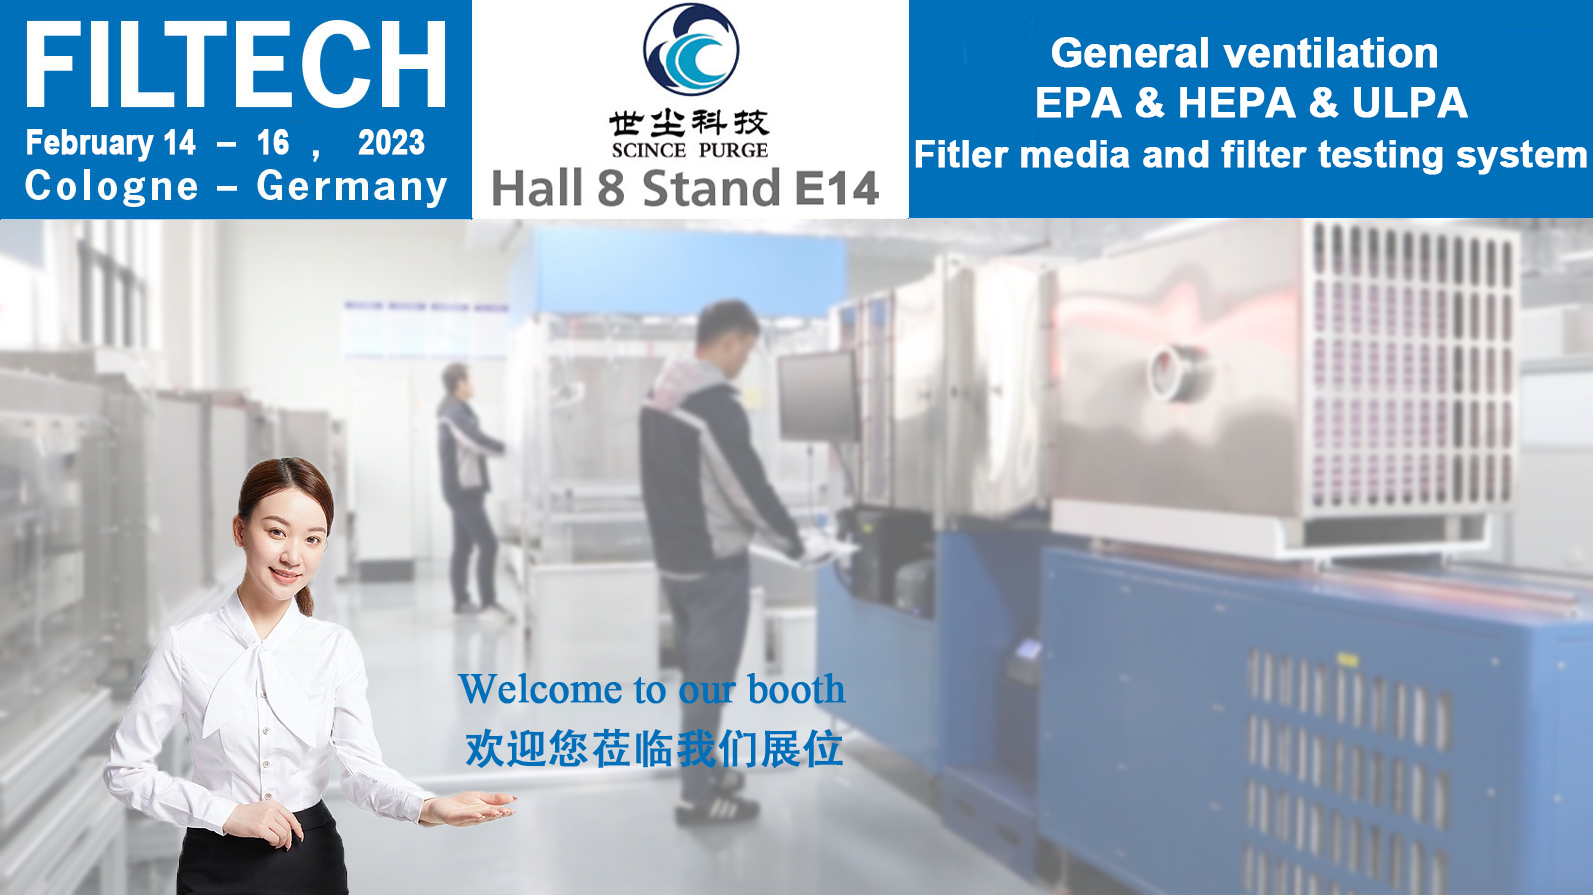 Company News, Cologne Germany, Feb. 14-16, 2023, we are waiting for you